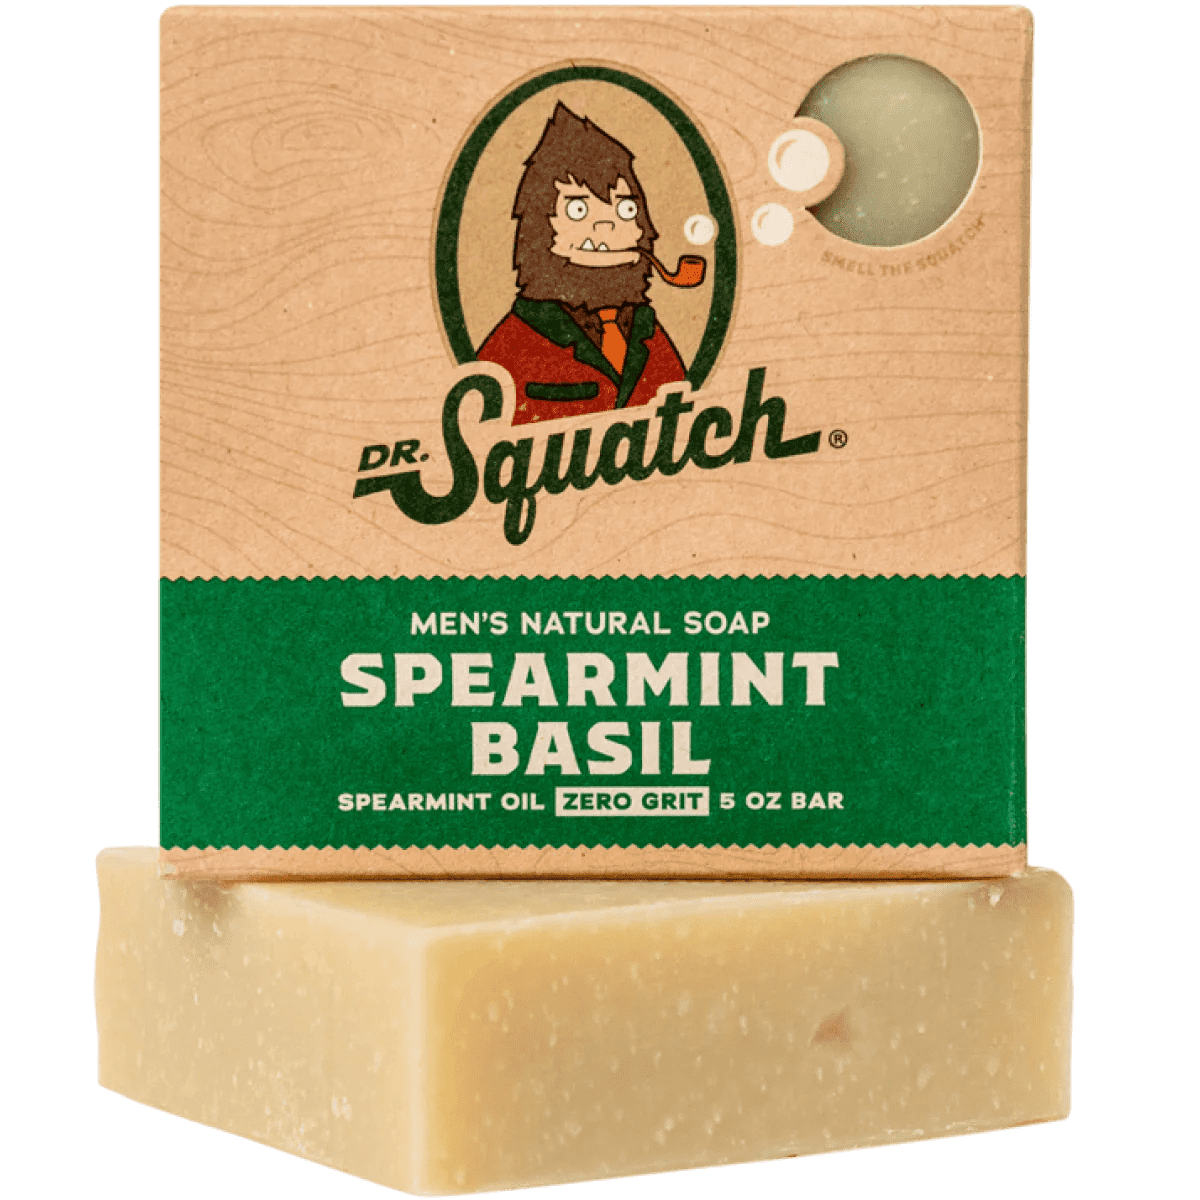  Dr. Squatch All Natural Bar Soap for Men with Zero Grit, Bay  Rum : Beauty & Personal Care